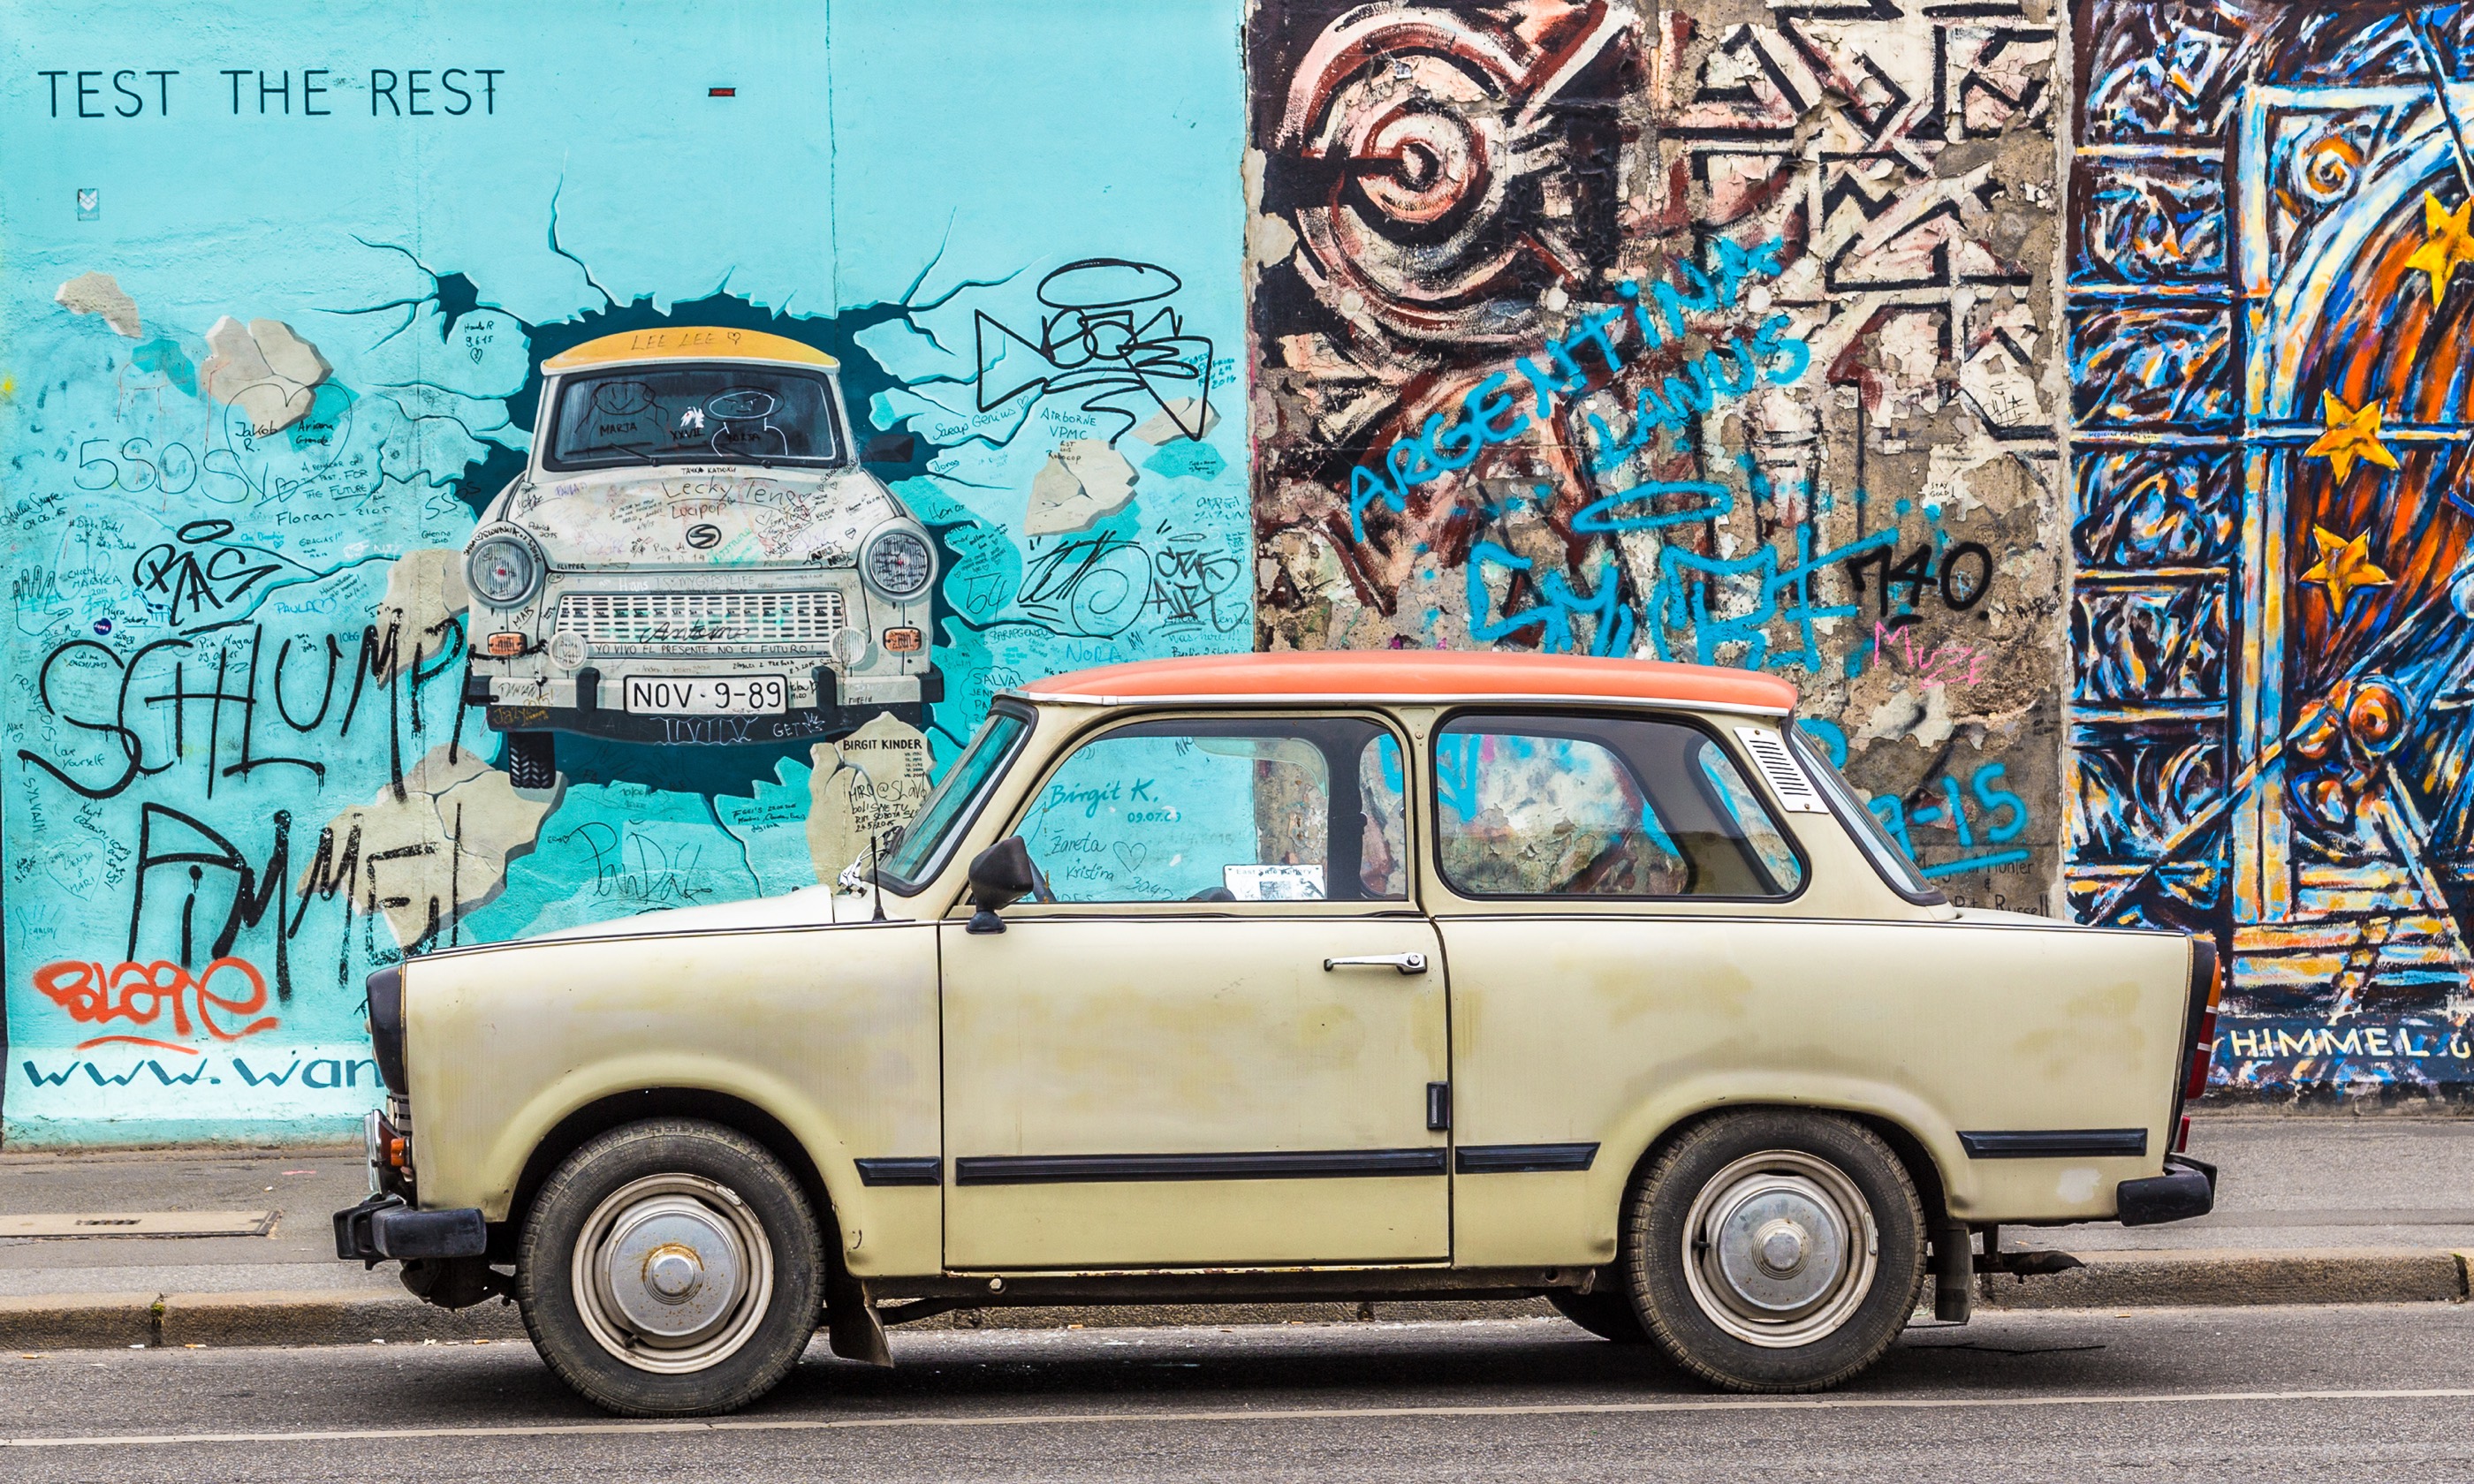 Trabant in front of the Berlin Wall (Shutterstock.com)